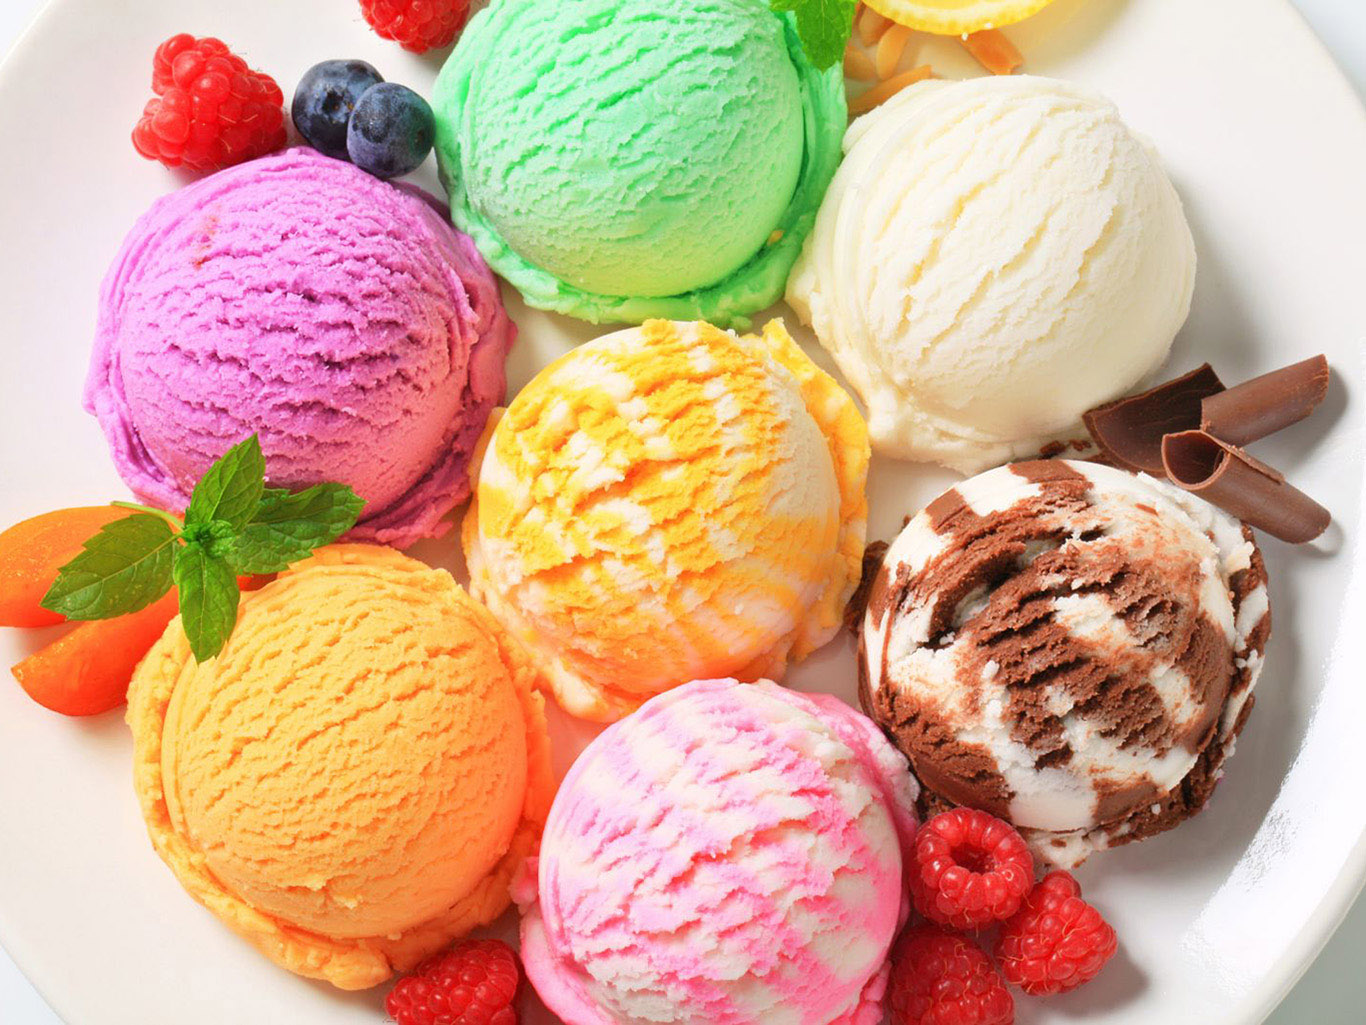 What favorite ice cream can tell about your character